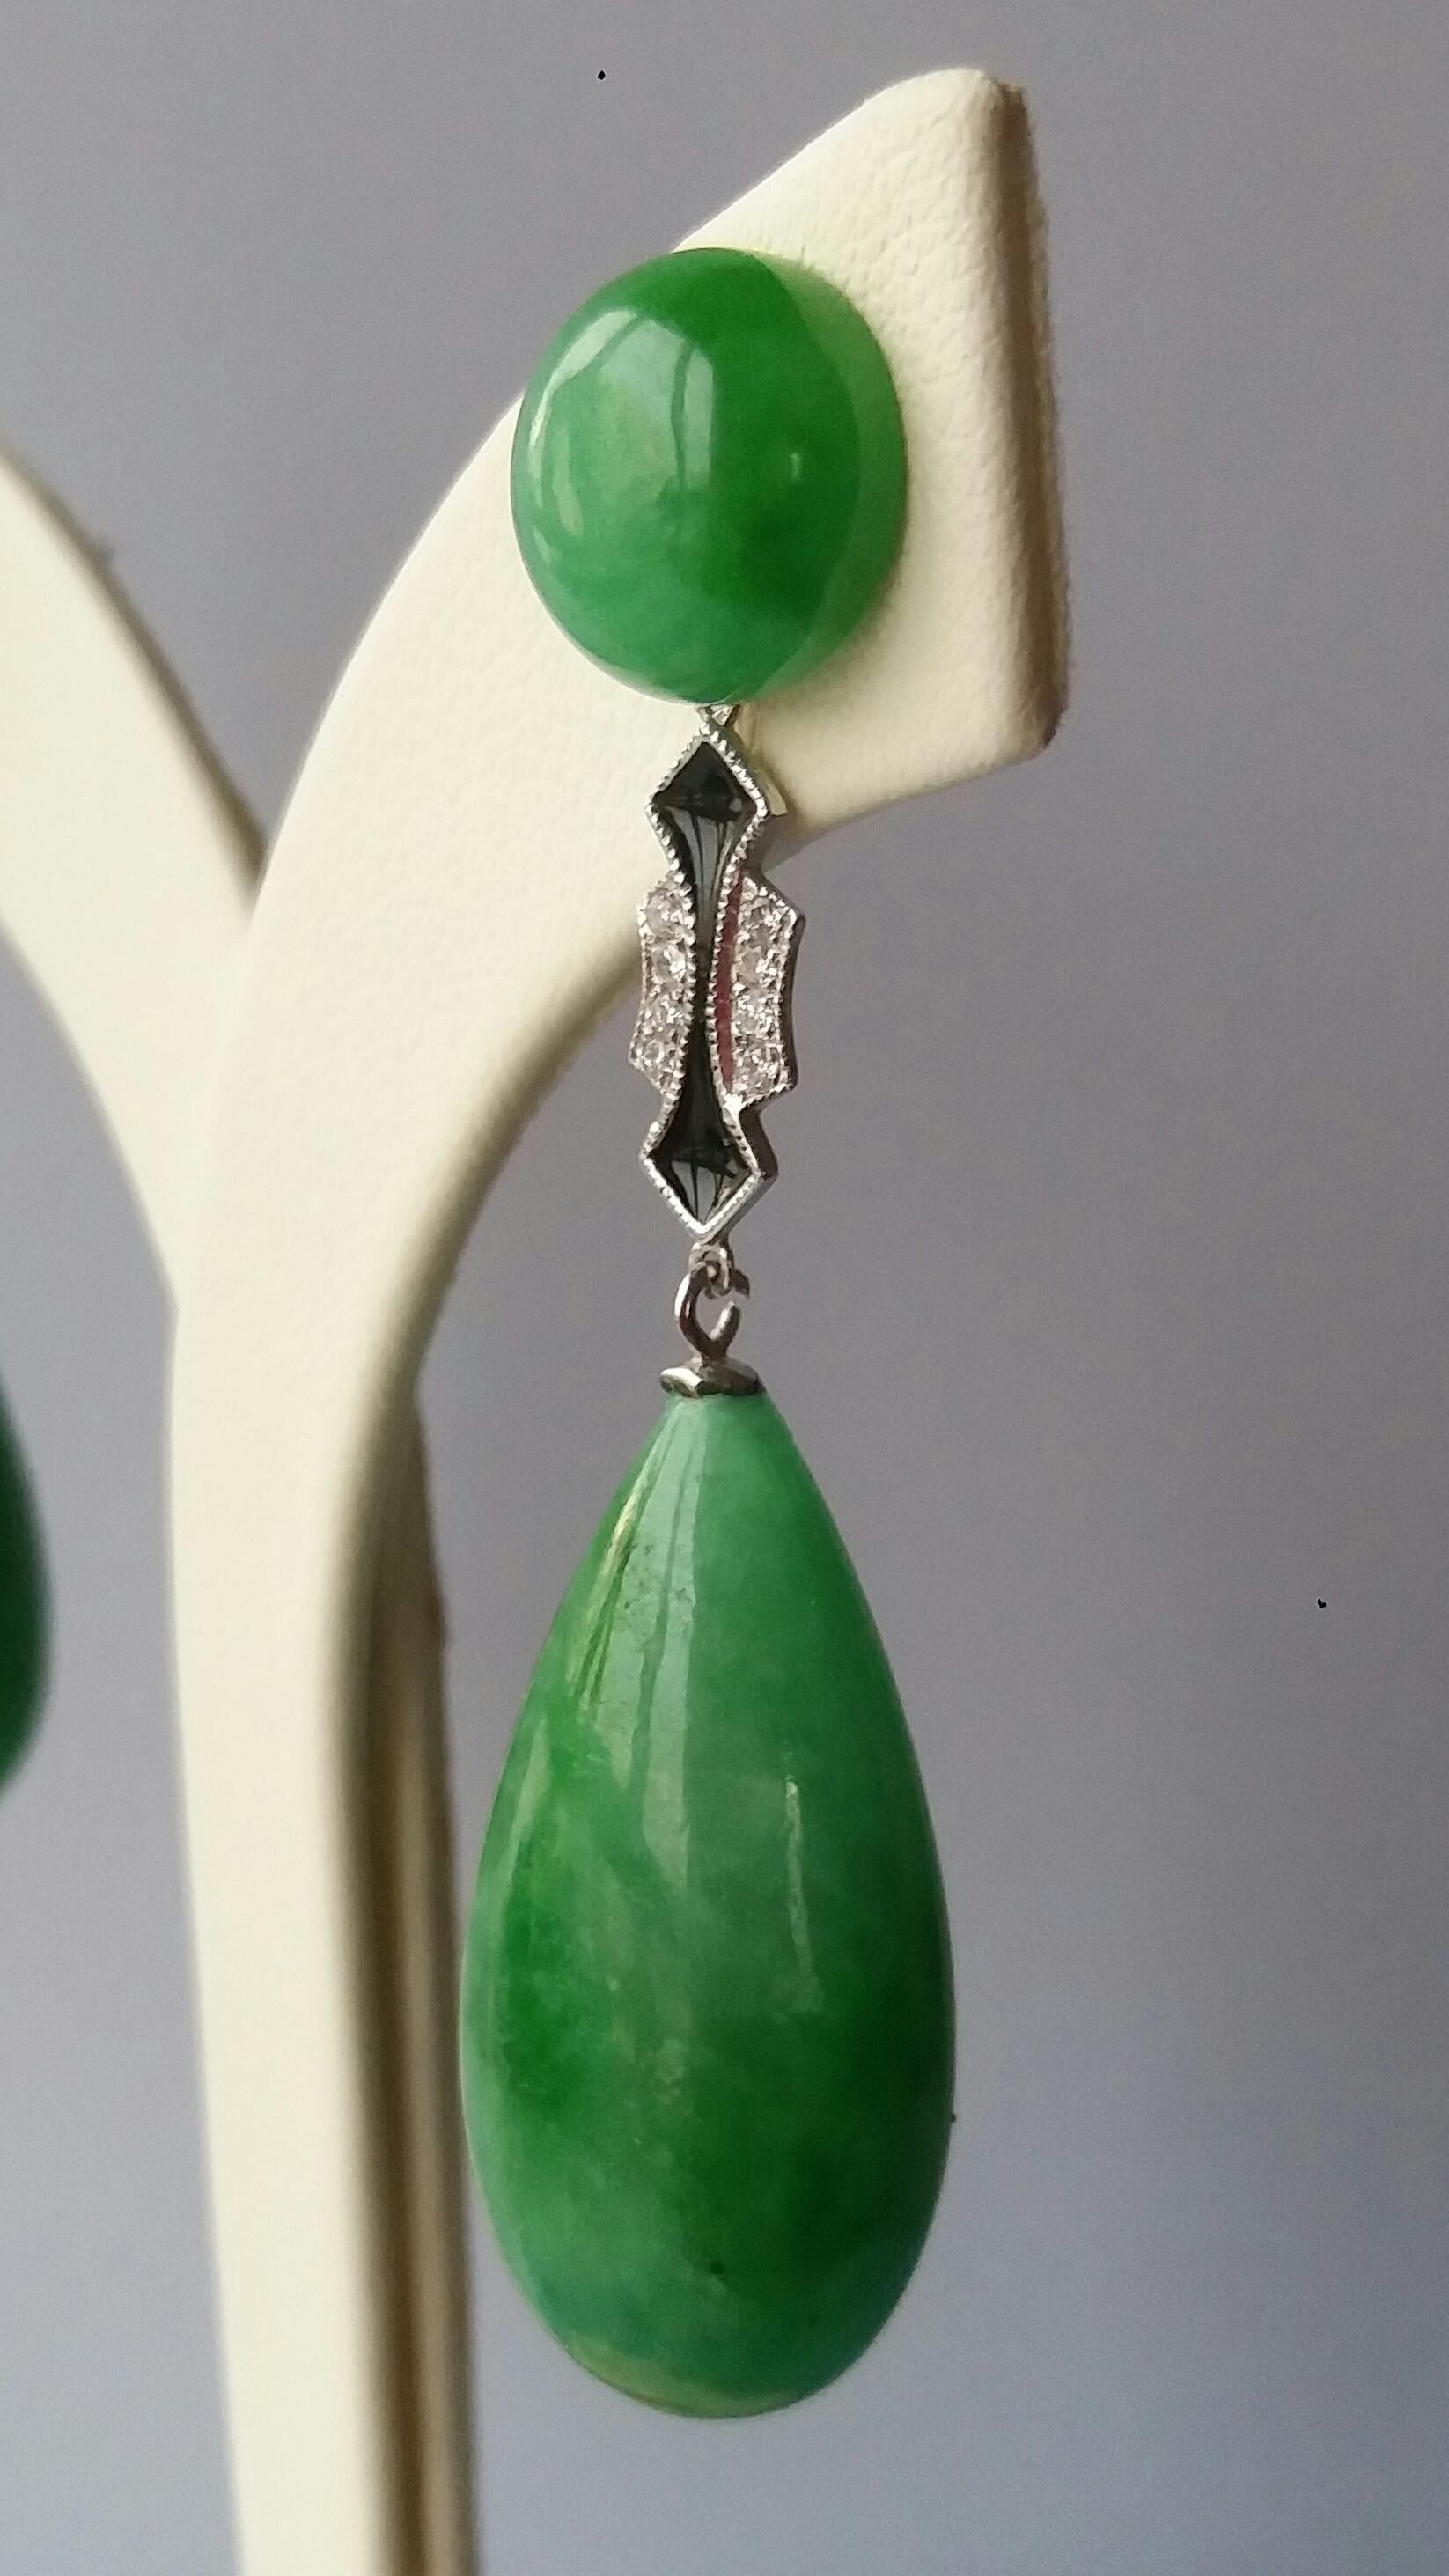 Tops are 2 round Jade buttons,middle part is in White Gold , Diamonds and Black Enamel,the bottom parts are 2  Burma Jade round drops.

In 1978 our workshop started in Italy to make simple-chic Art Deco style jewellery, completely handmade and using